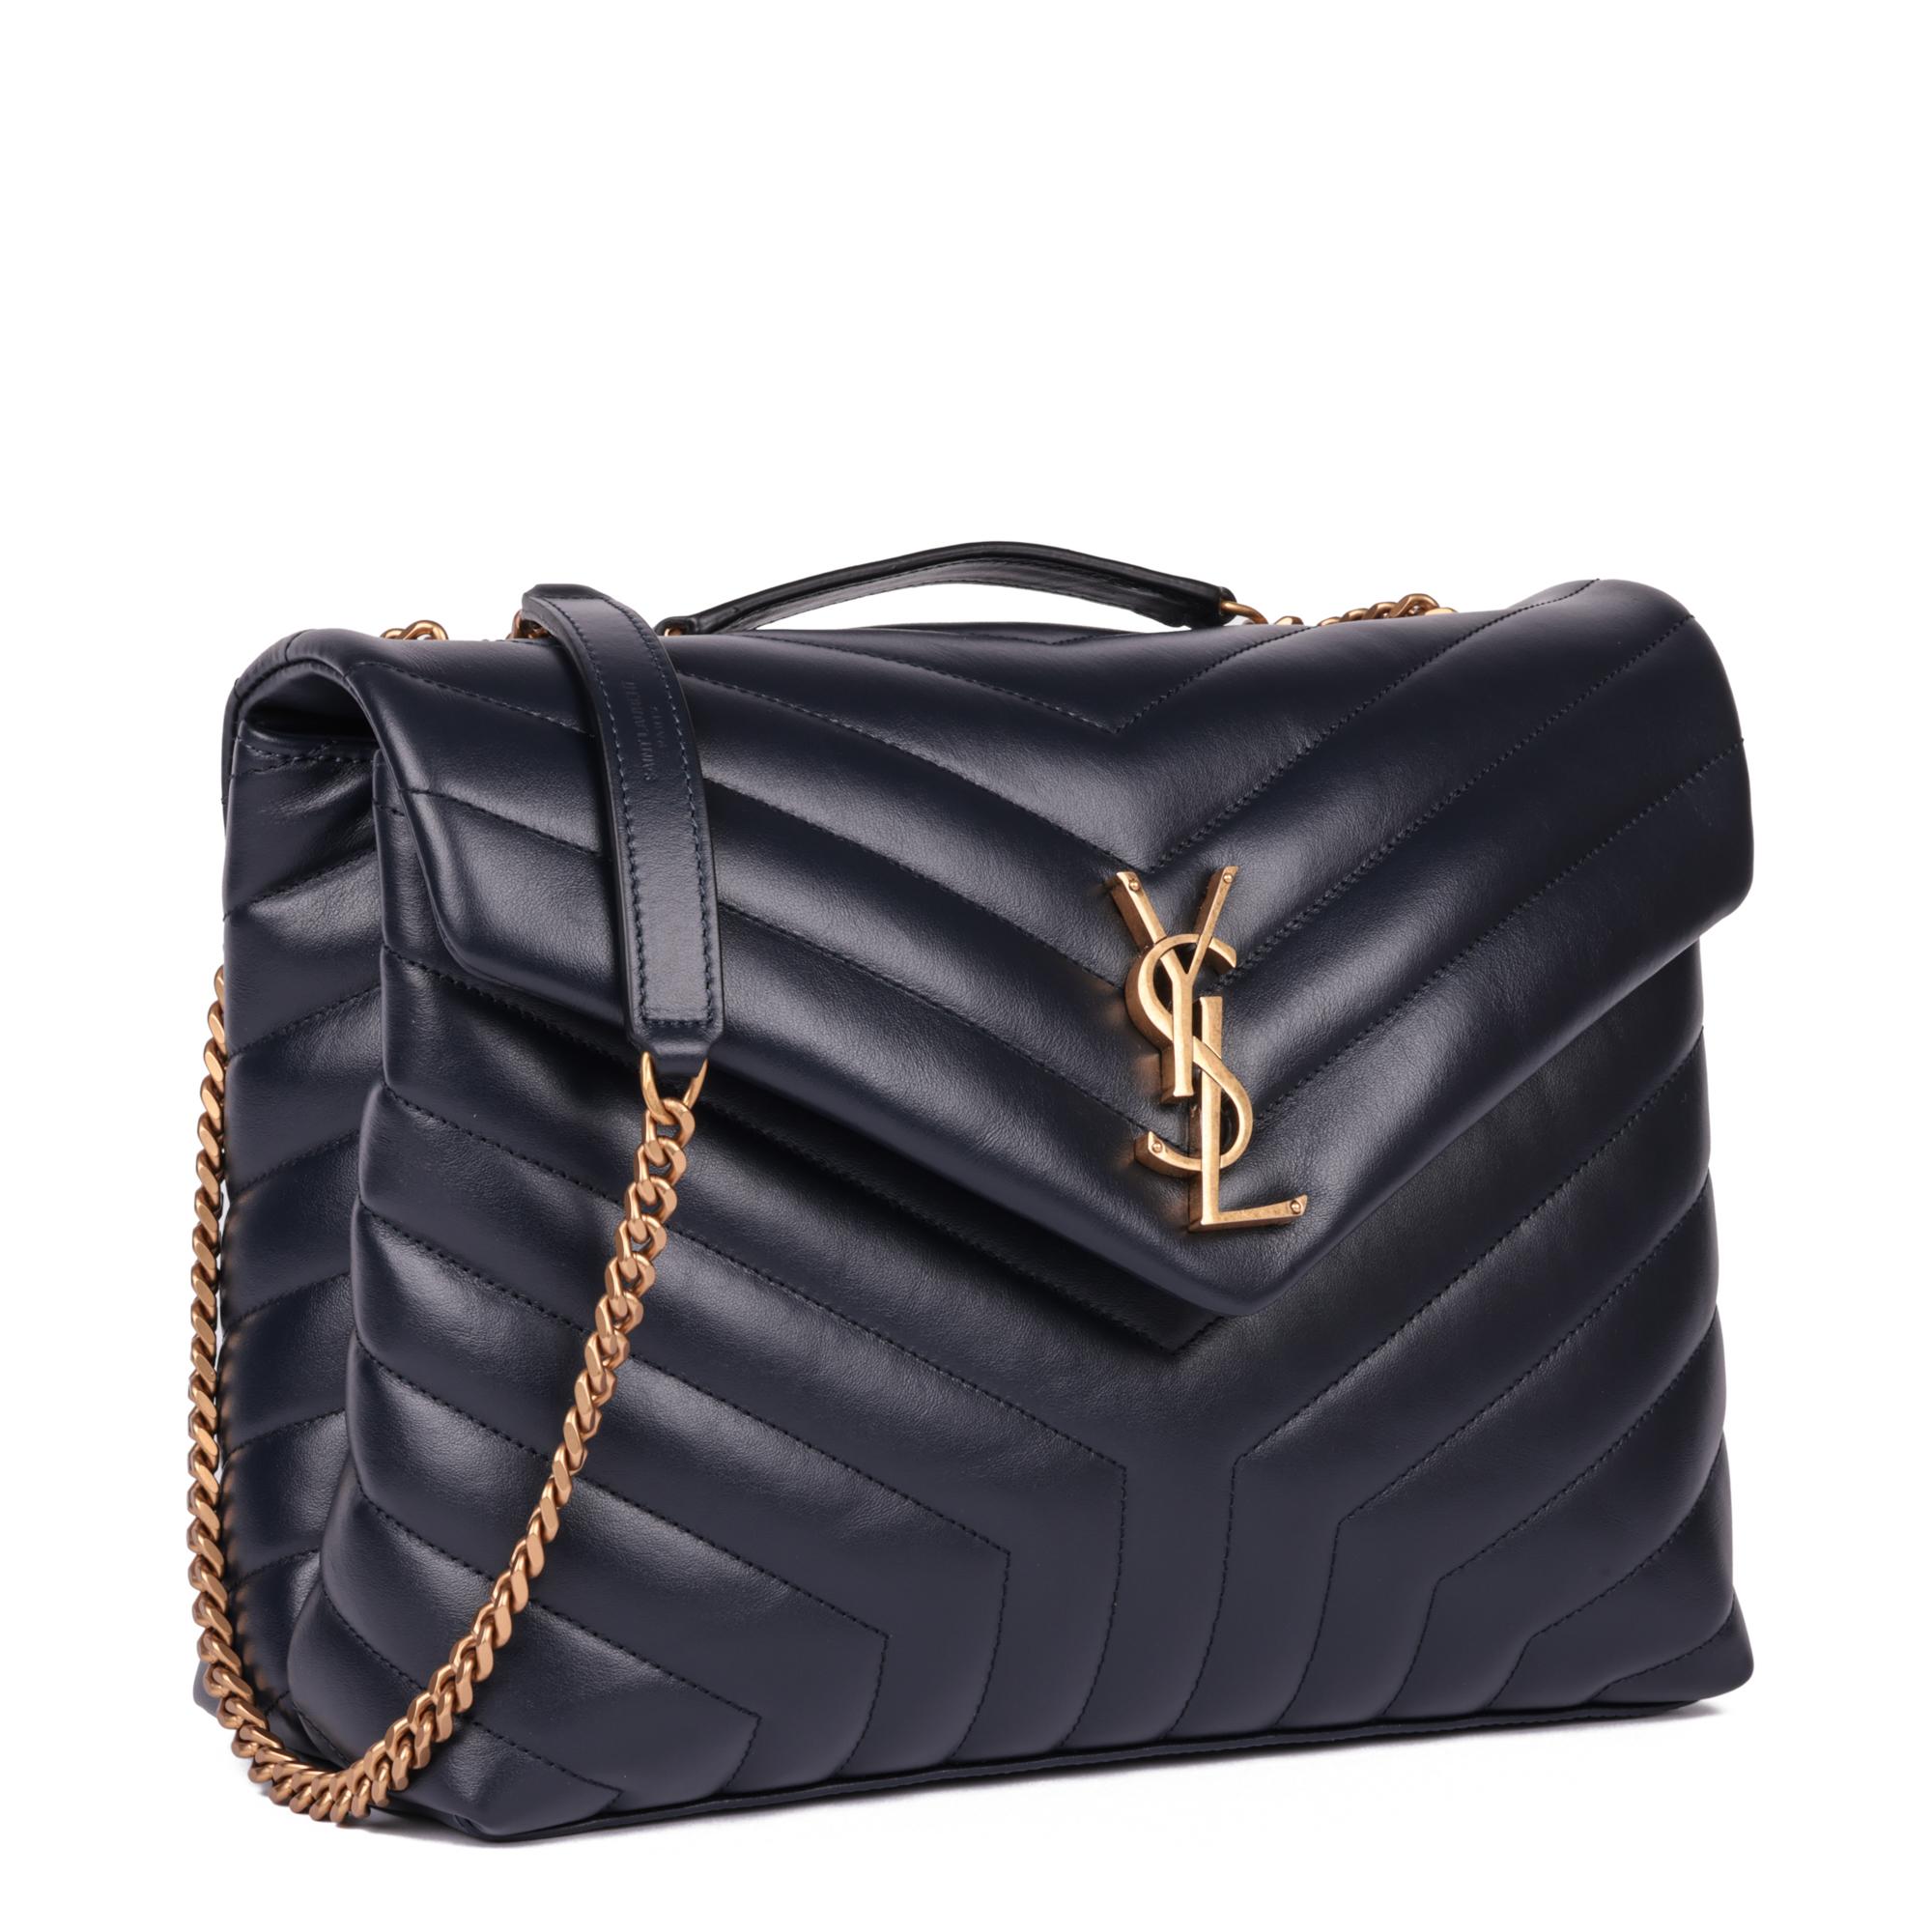 SAINT LAURENT
Navy Y Quilted Calfskin Leather Medium Loulou

Serial Number: PMR574946.0421
Age (Circa): 2022
Accompanied By: Saint Laurent Dust Bag, Care Card
Authenticity Details: Date Stamp (Made in Italy)
Gender: Ladies
Type: Shoulder,